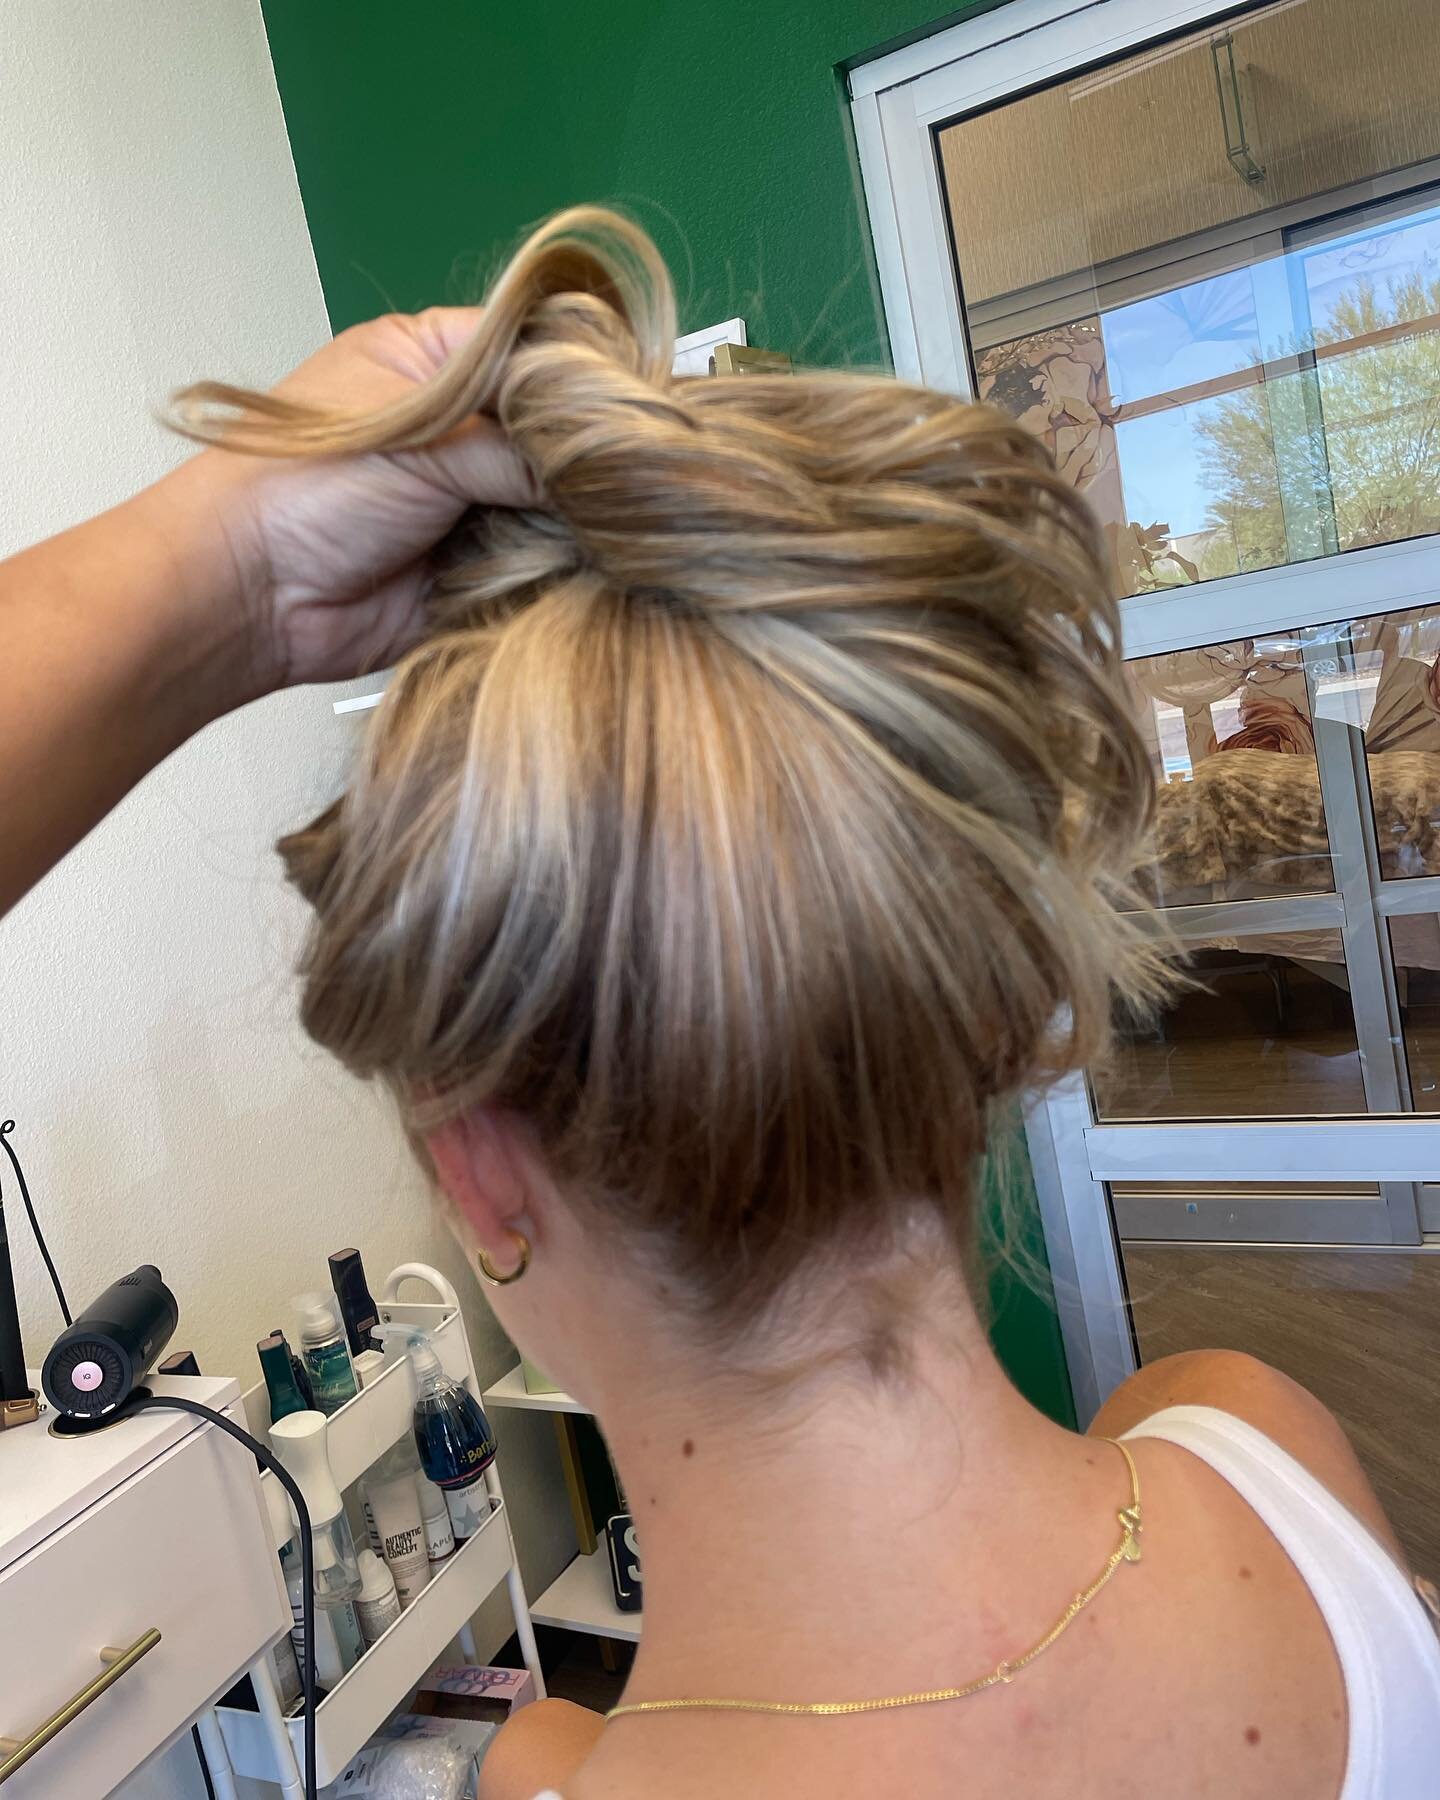 It's all in the details...hairline needed some love with babylights.
&bull;
&bull;
&bull;
&bull;
&bull;
&bull;
#shearroots #rootmelt #blondehair #balayage #highlights #babylights #phx #tempehairstylist #tempesalon #lowlights #hairpainting #chandlersa